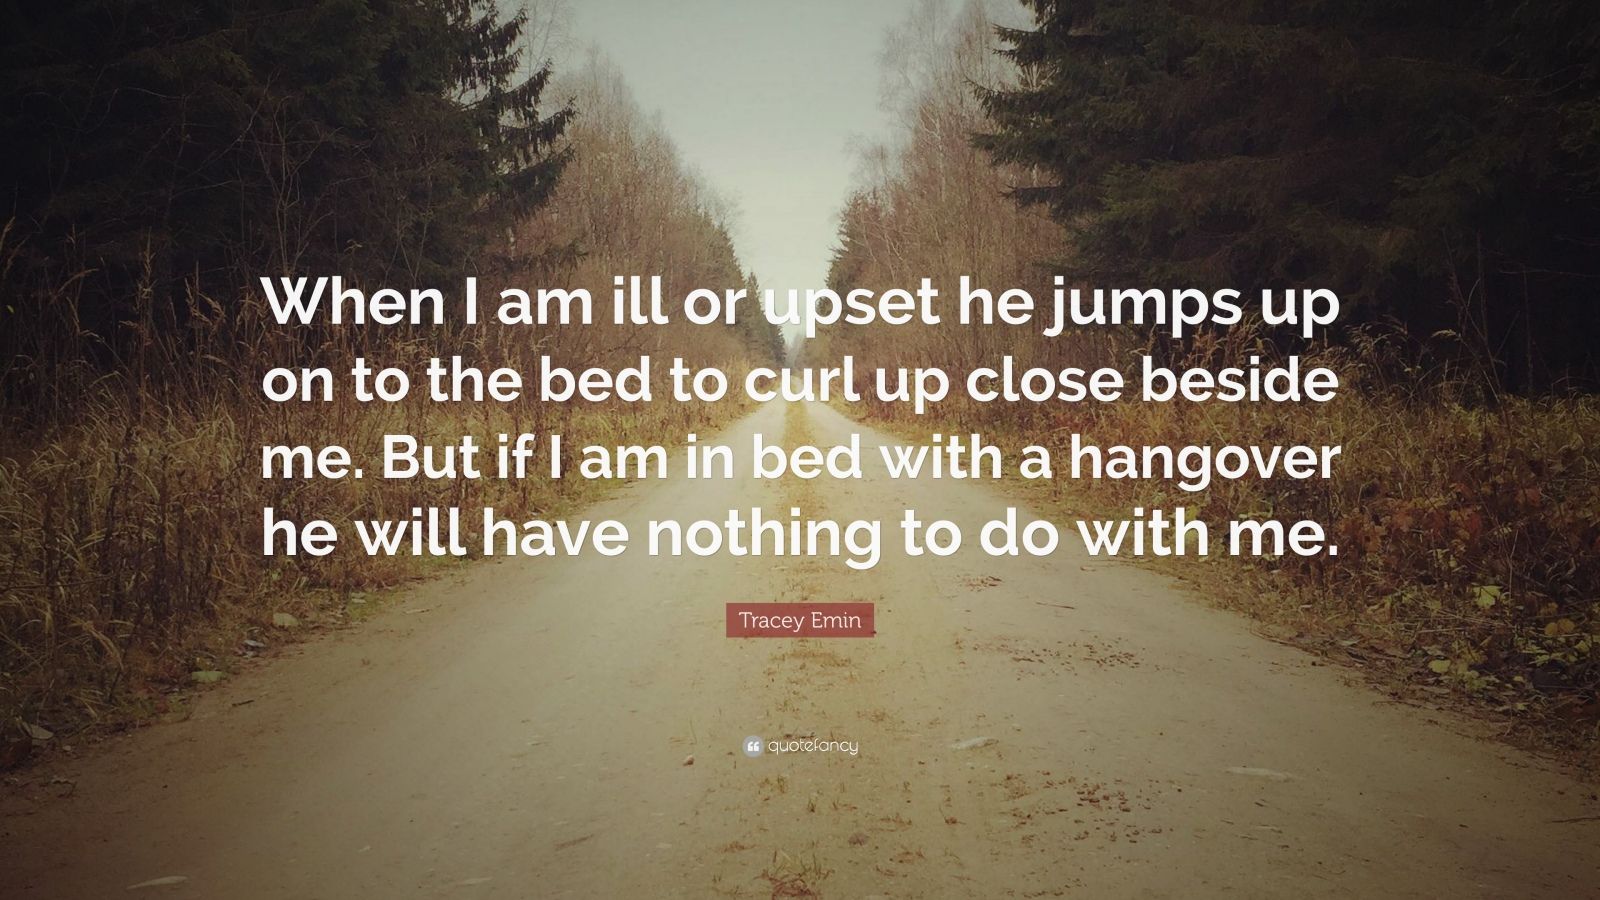 Tracey Emin Quote: “When I am ill or upset he jumps up on to the bed to ...